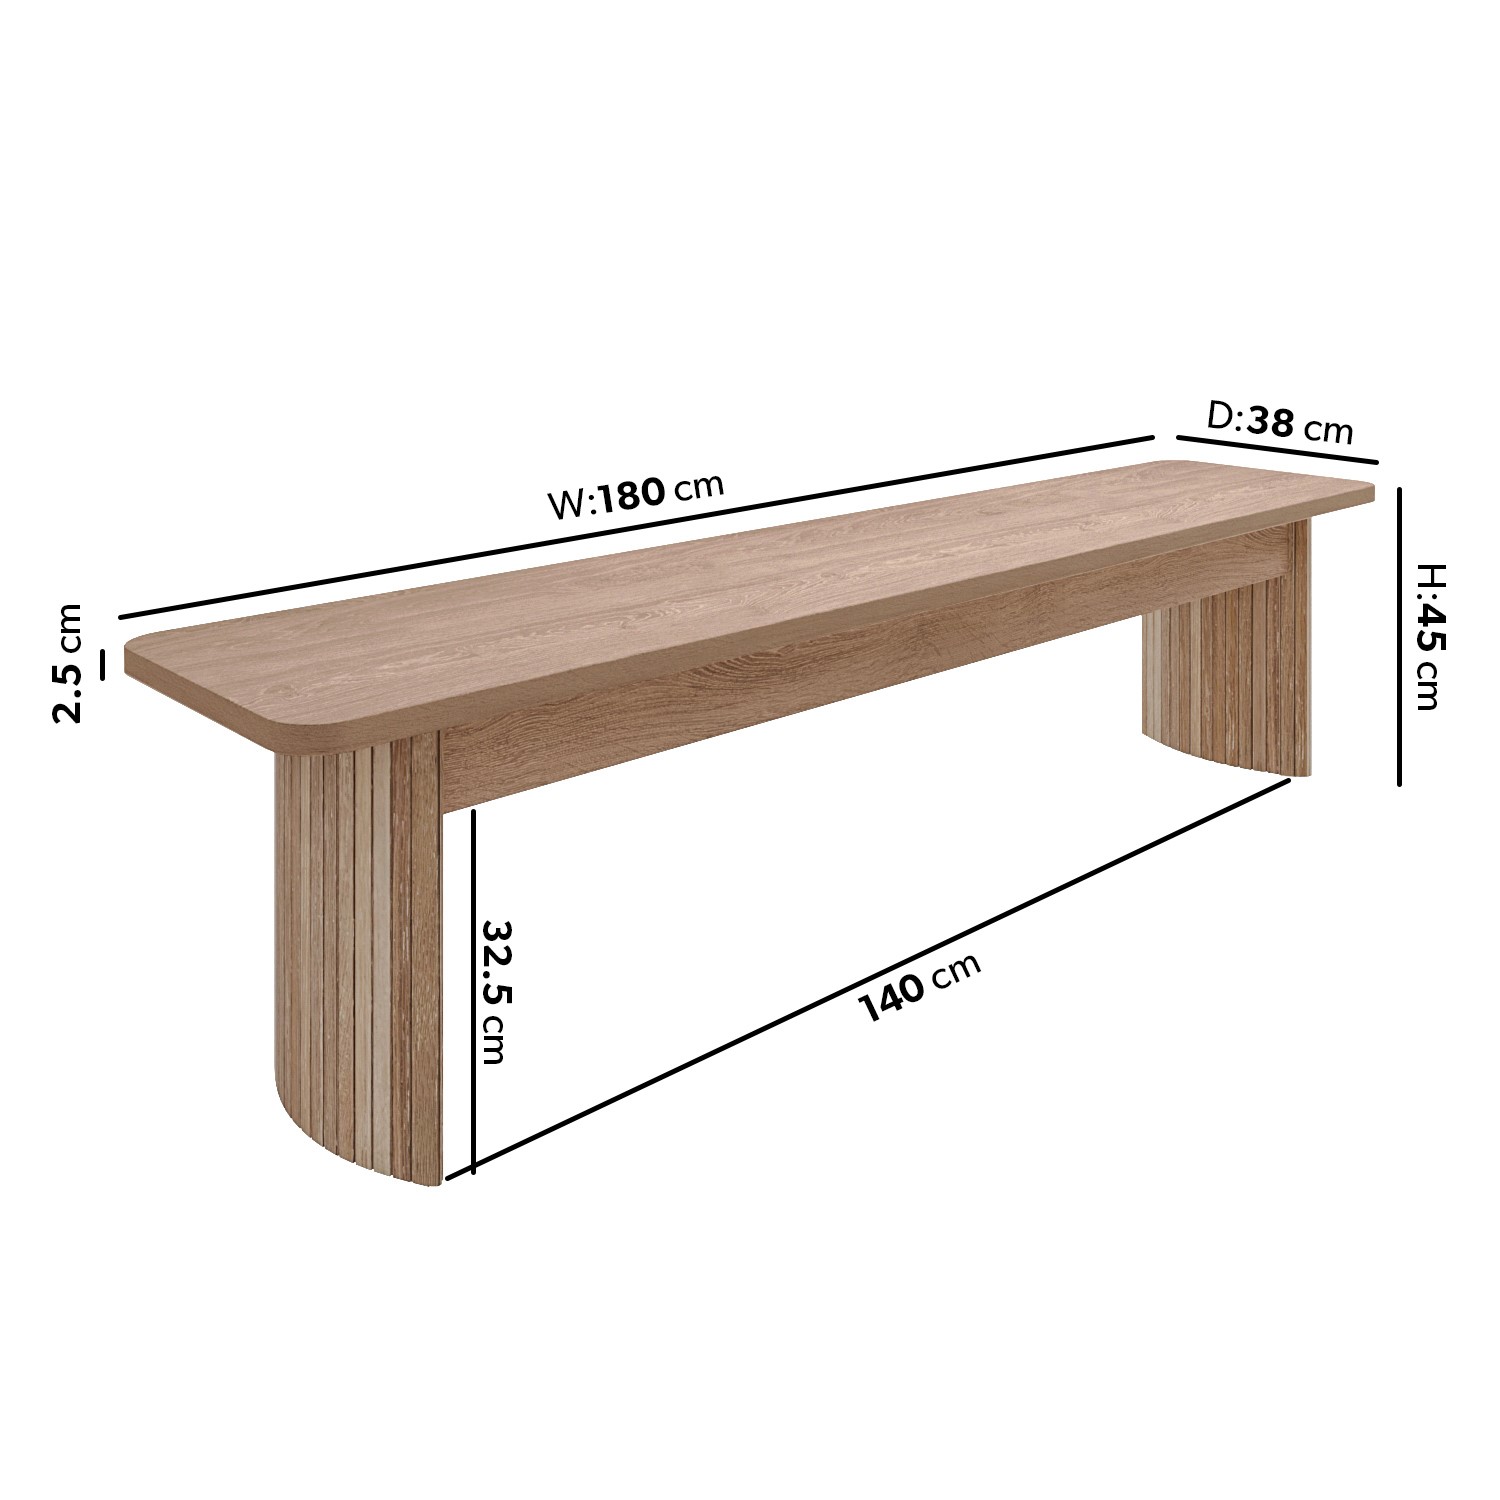 Read more about Large light oak dining bench seats 3 jarel